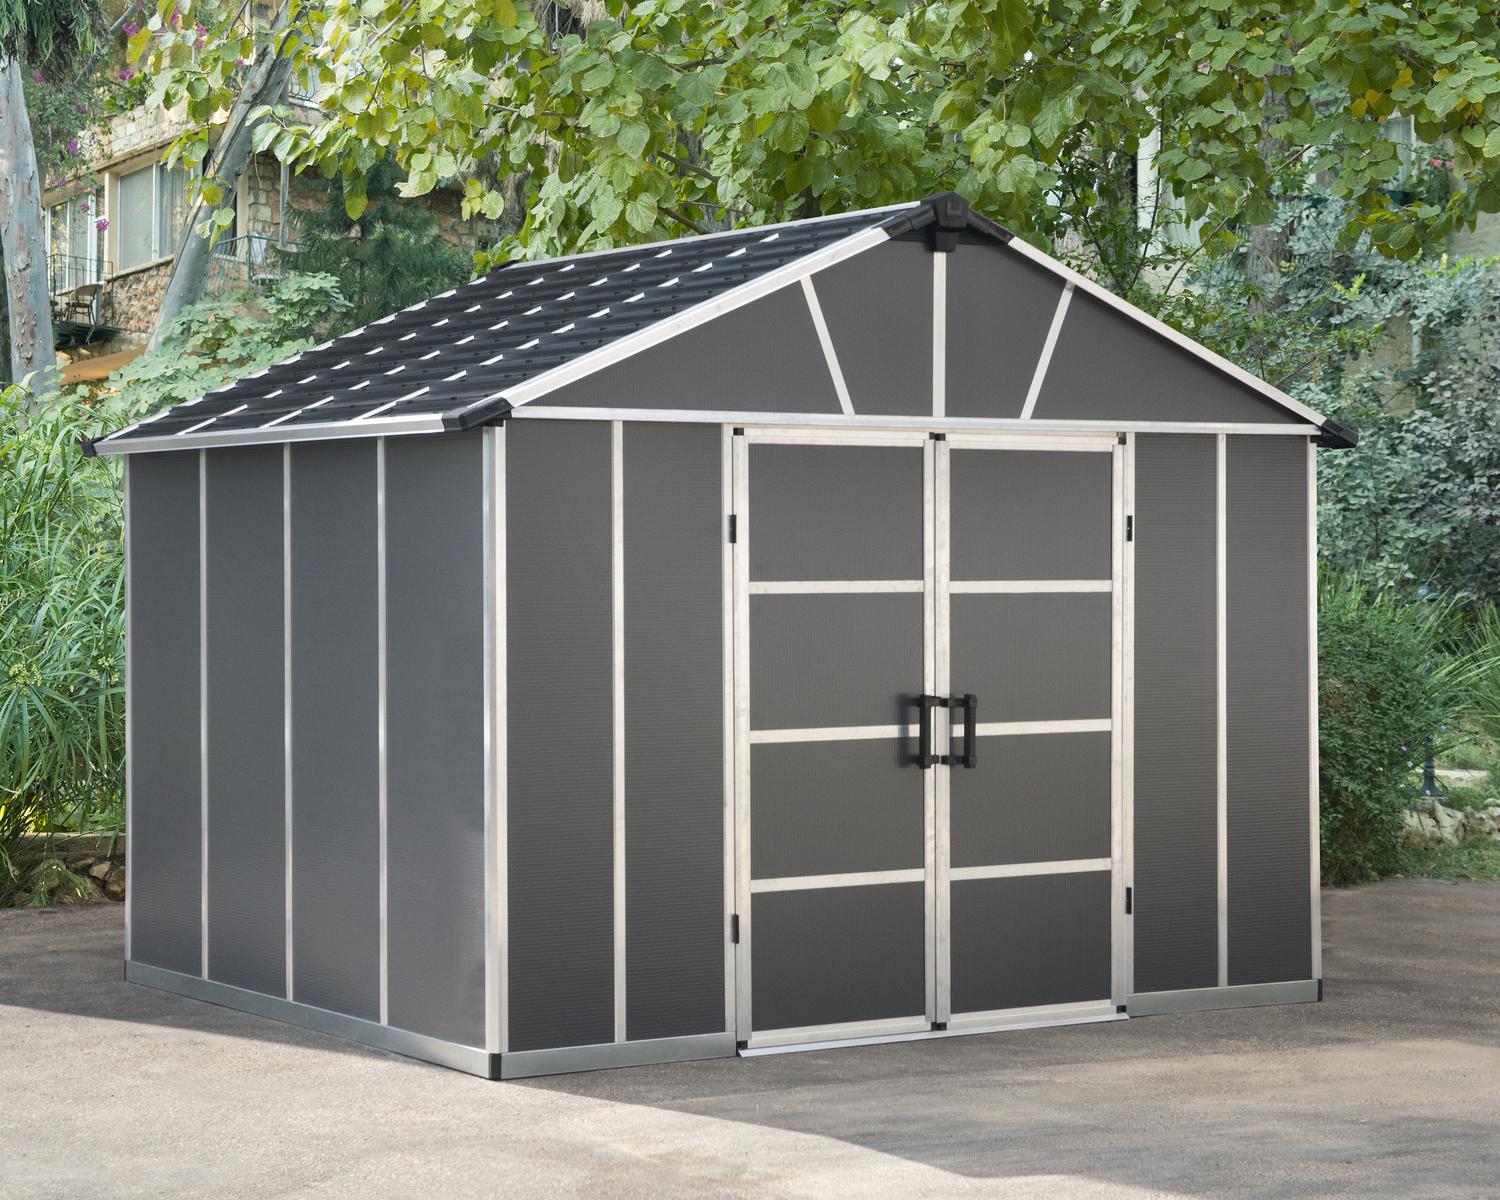 Tool Shed Garden Shed Storage Shed Details about   Bin Shed 2x0.9x1.3m 